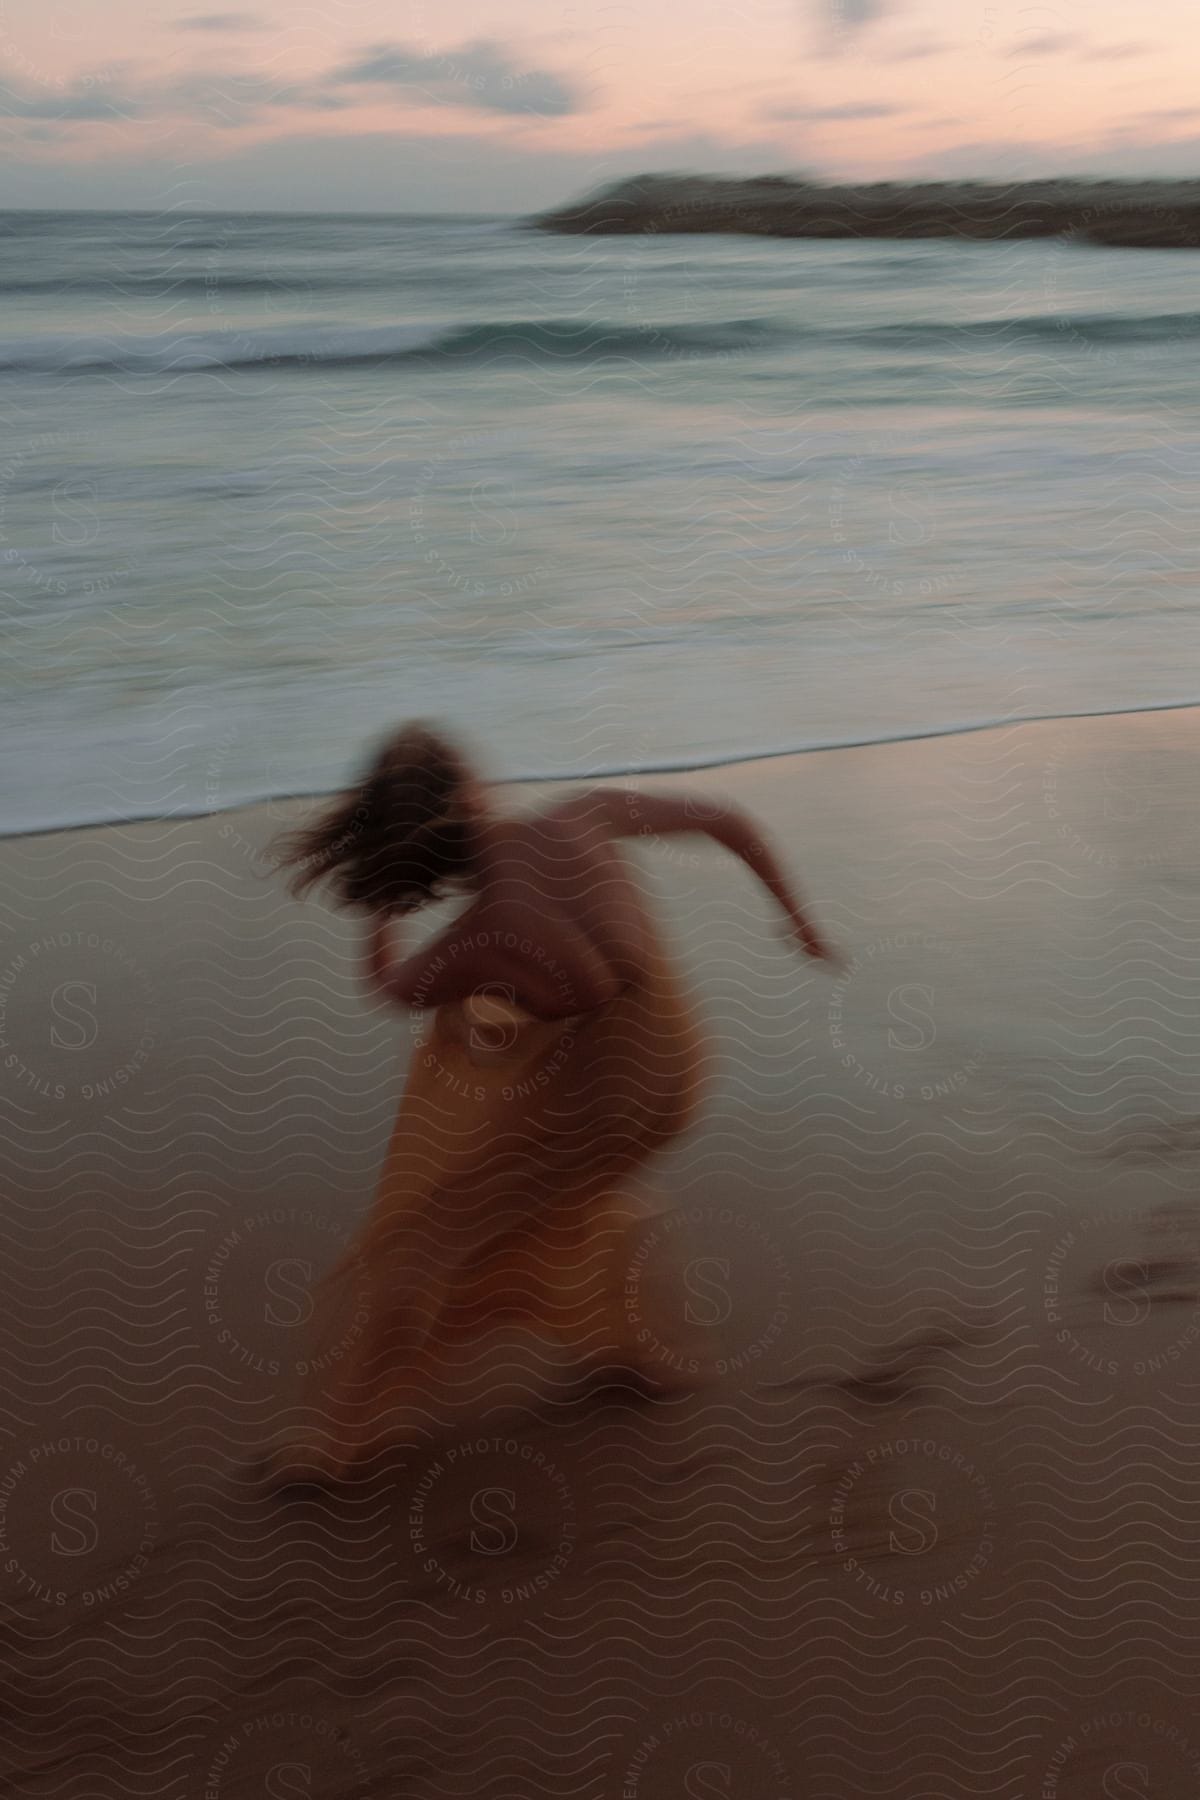 A lady dances around the beach as her hair swings back and forth.